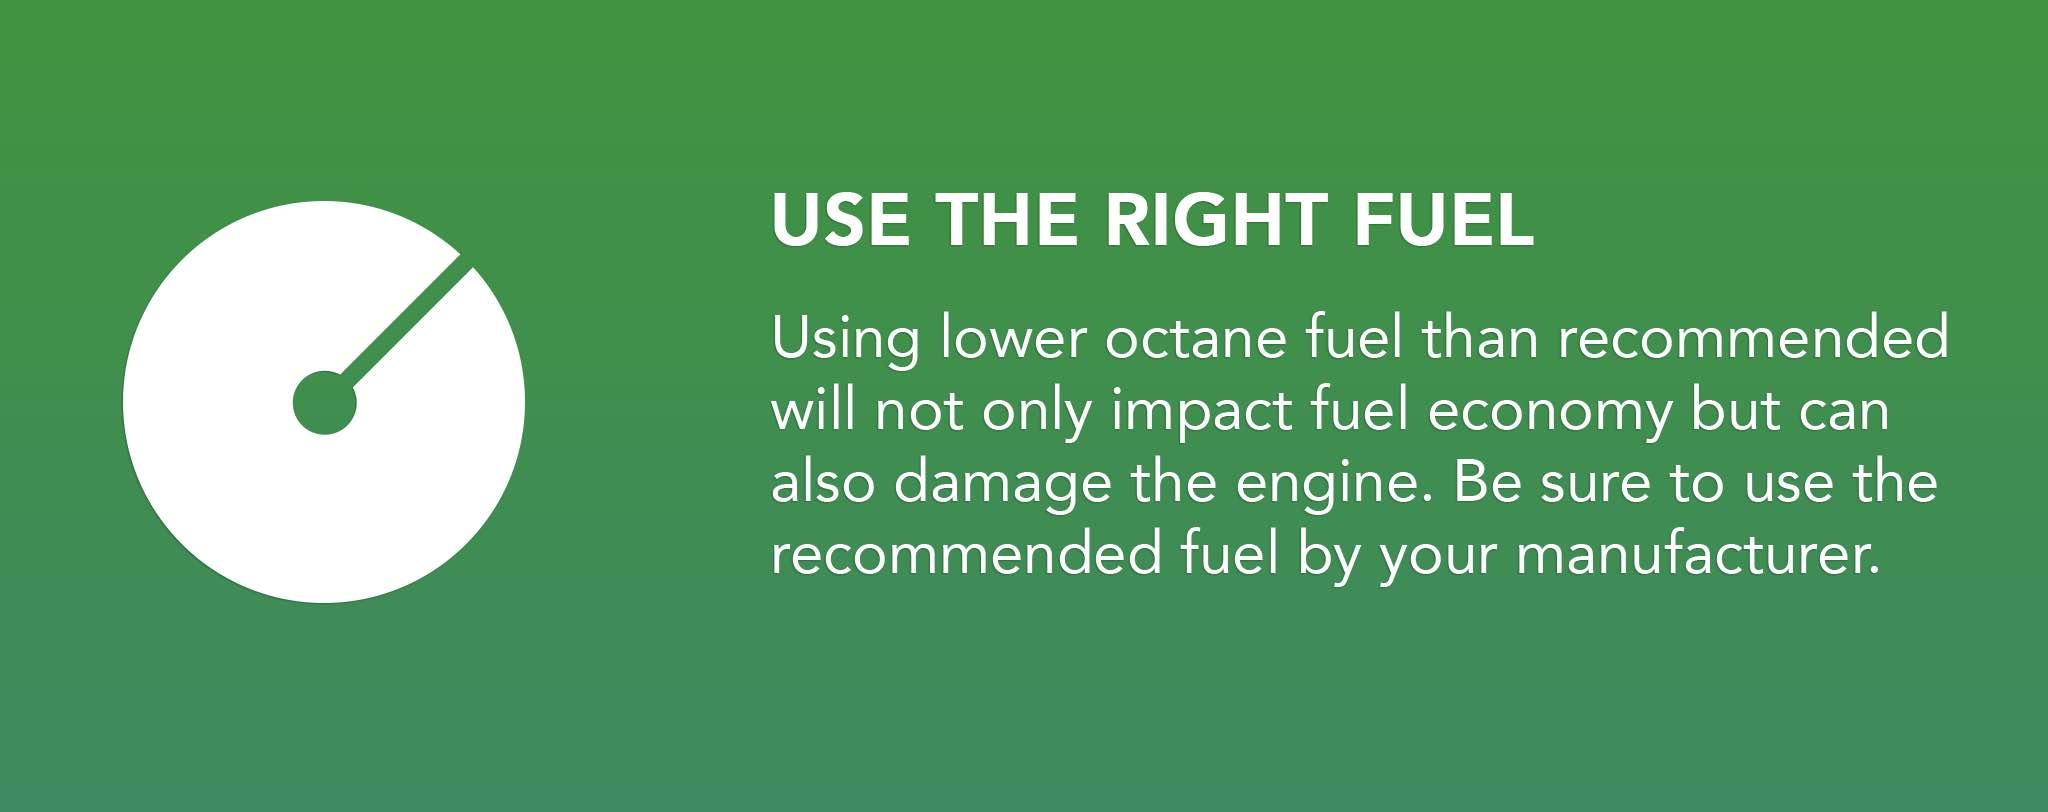 Using lower octane fuel than recommended will not only impact fuel economy but can also damage the engine. Be sure to use the recommended fuel by your manufacturer.